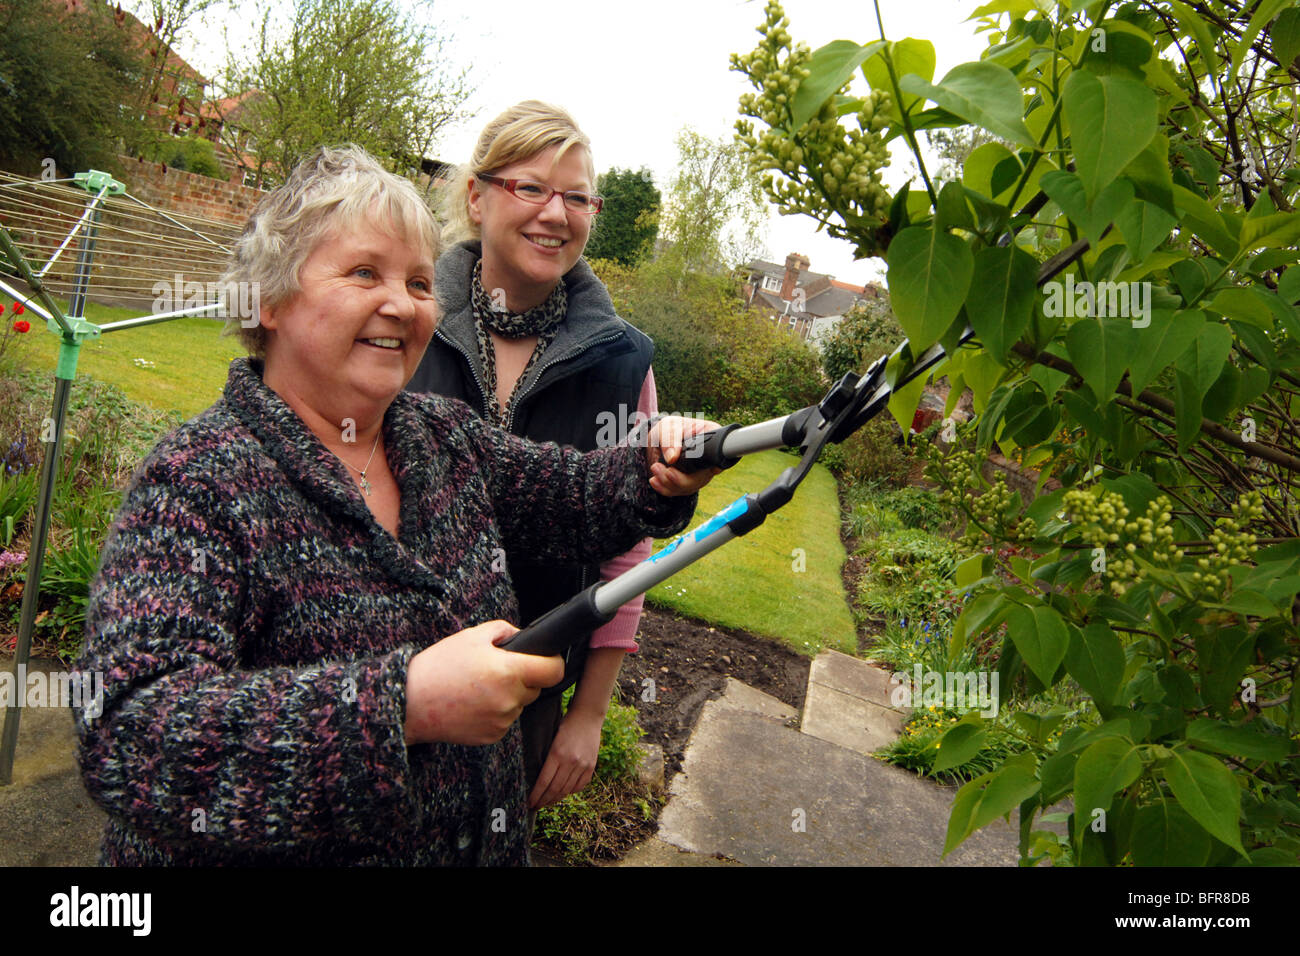 A resident and Support Worker trim the hedge of the Housing Association garden for people with mental health problems, York. Stock Photo